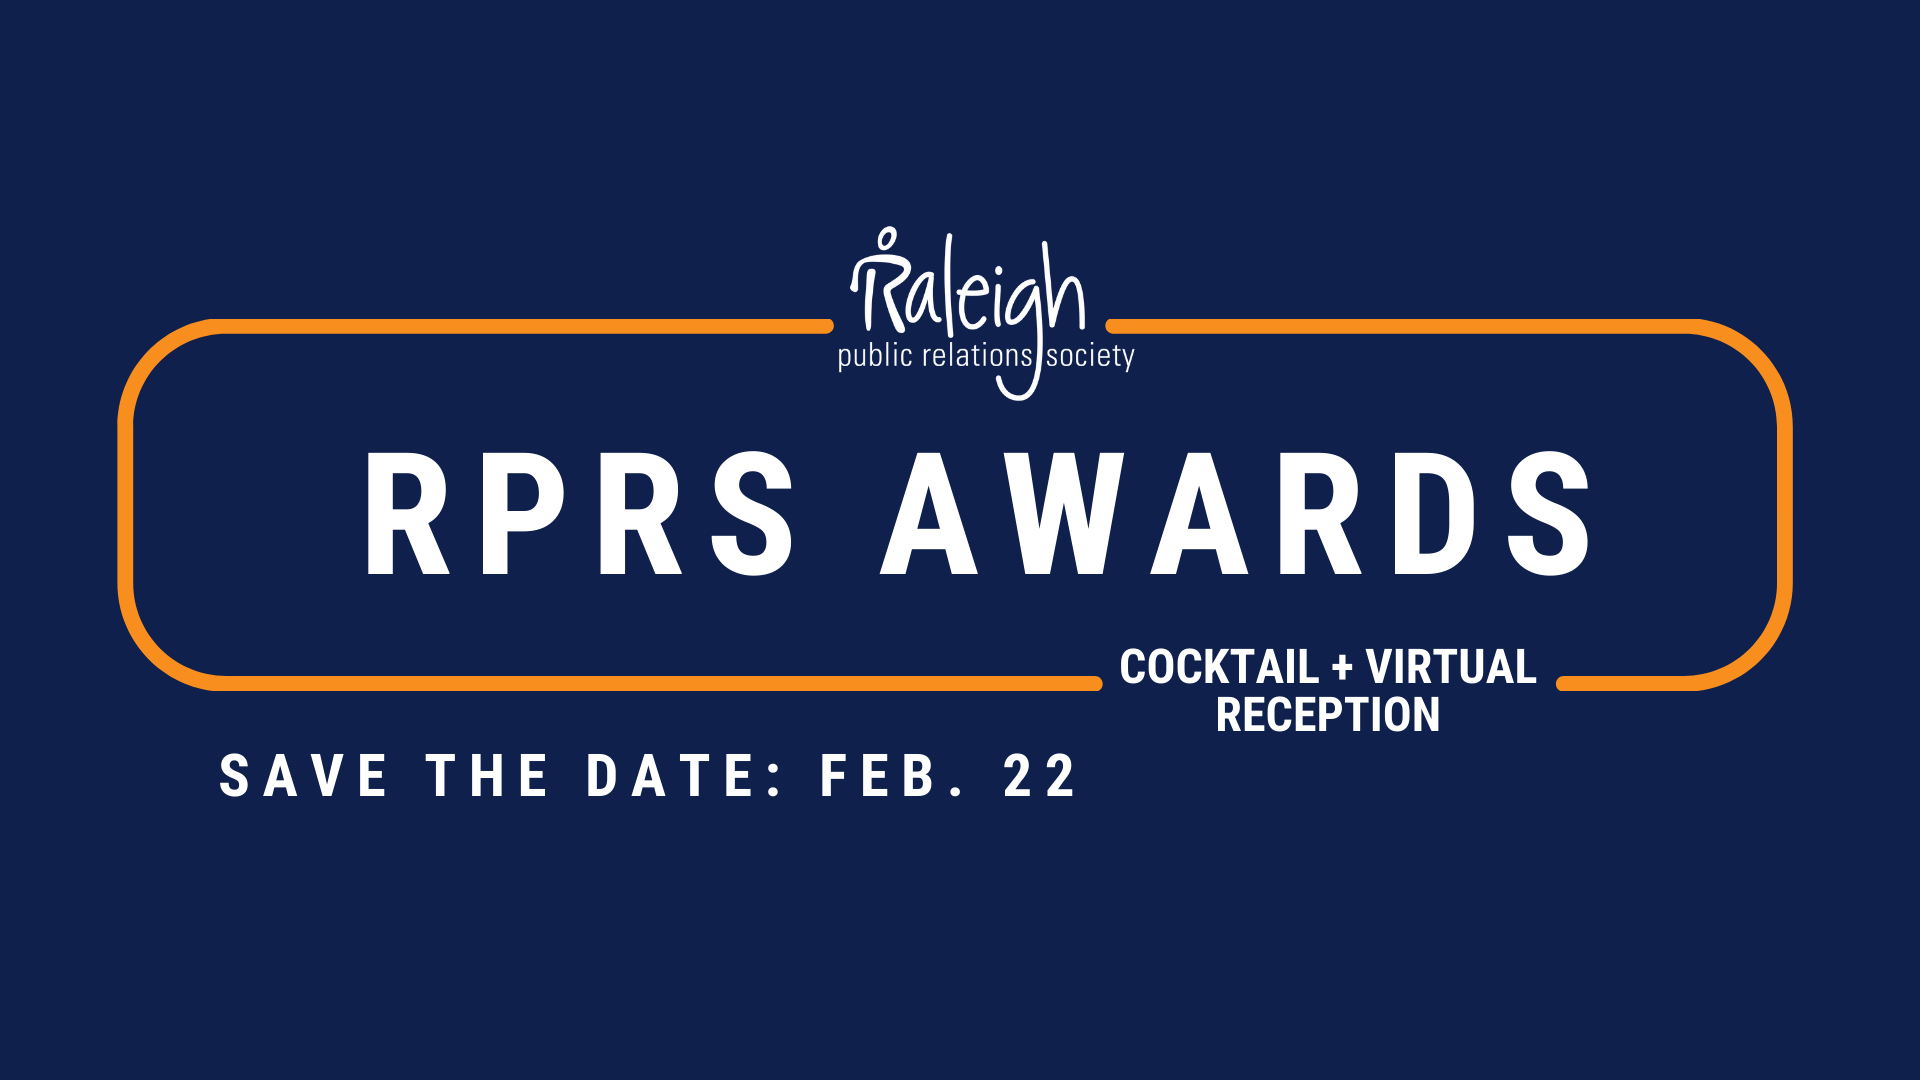 Sir Walter Raleigh Awards for Excellence in Communication RPRS Awards 2022 Reception